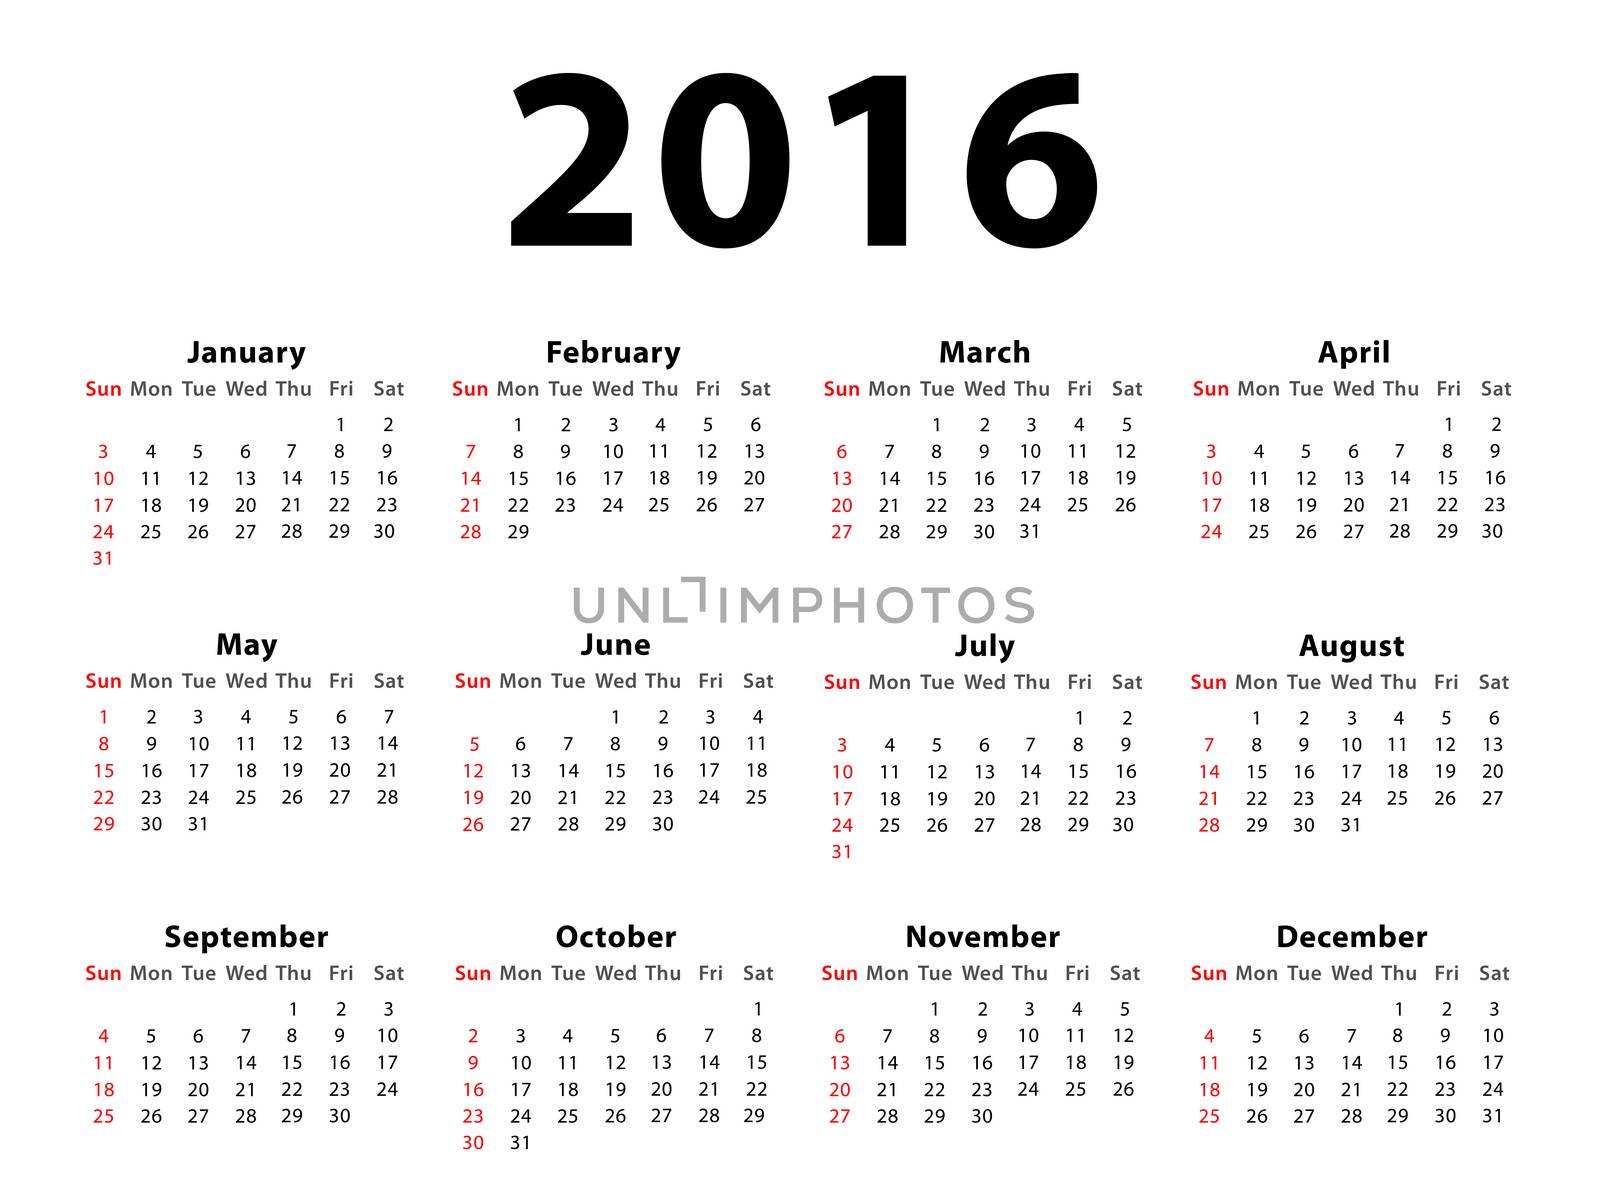 Calendar of 2016 isolated on white background